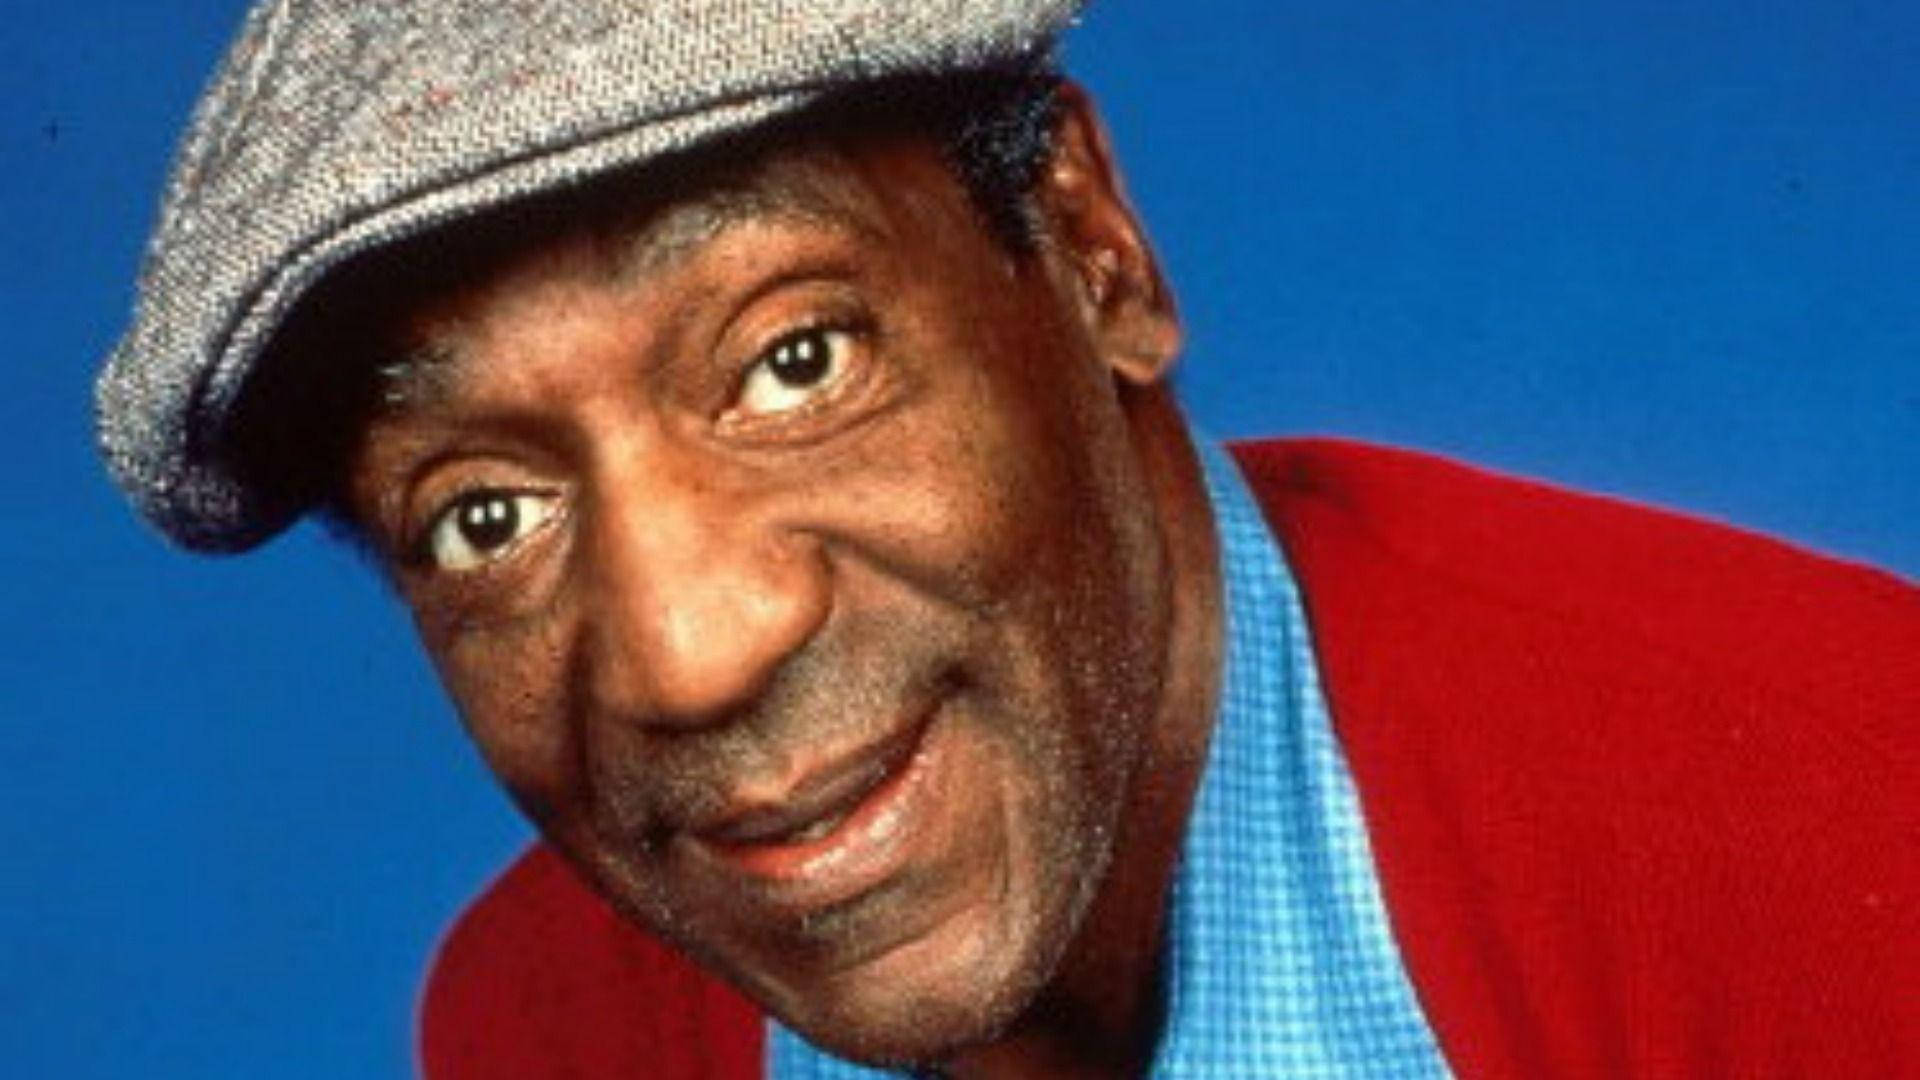 Bill Cosby With A Joyous Smile